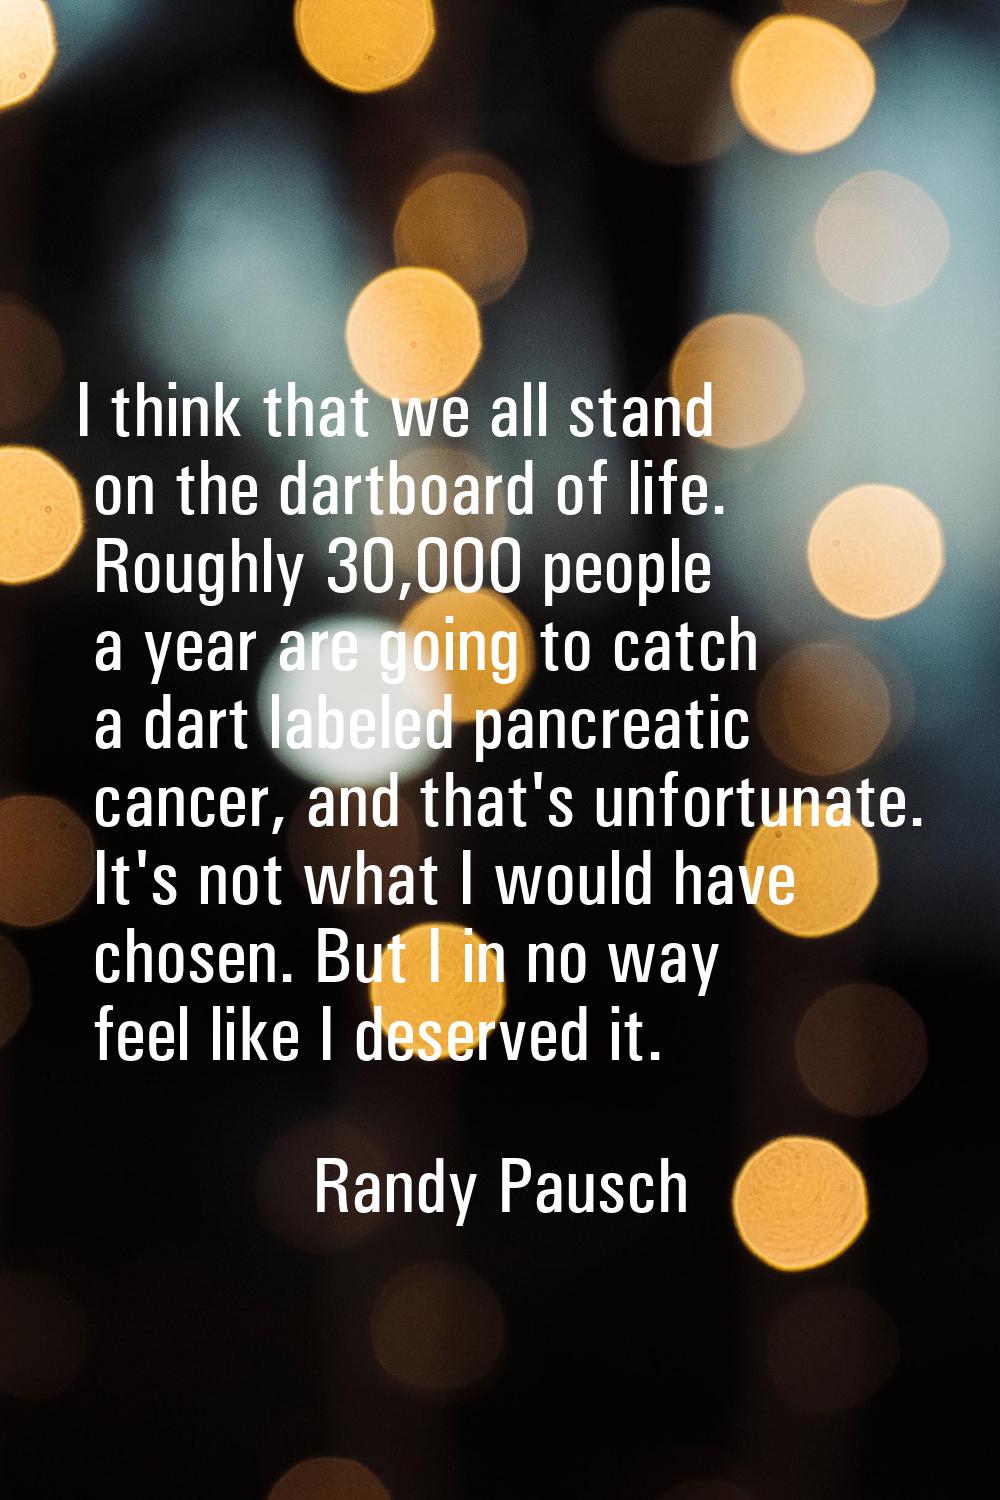 I think that we all stand on the dartboard of life. Roughly 30,000 people a year are going to catch